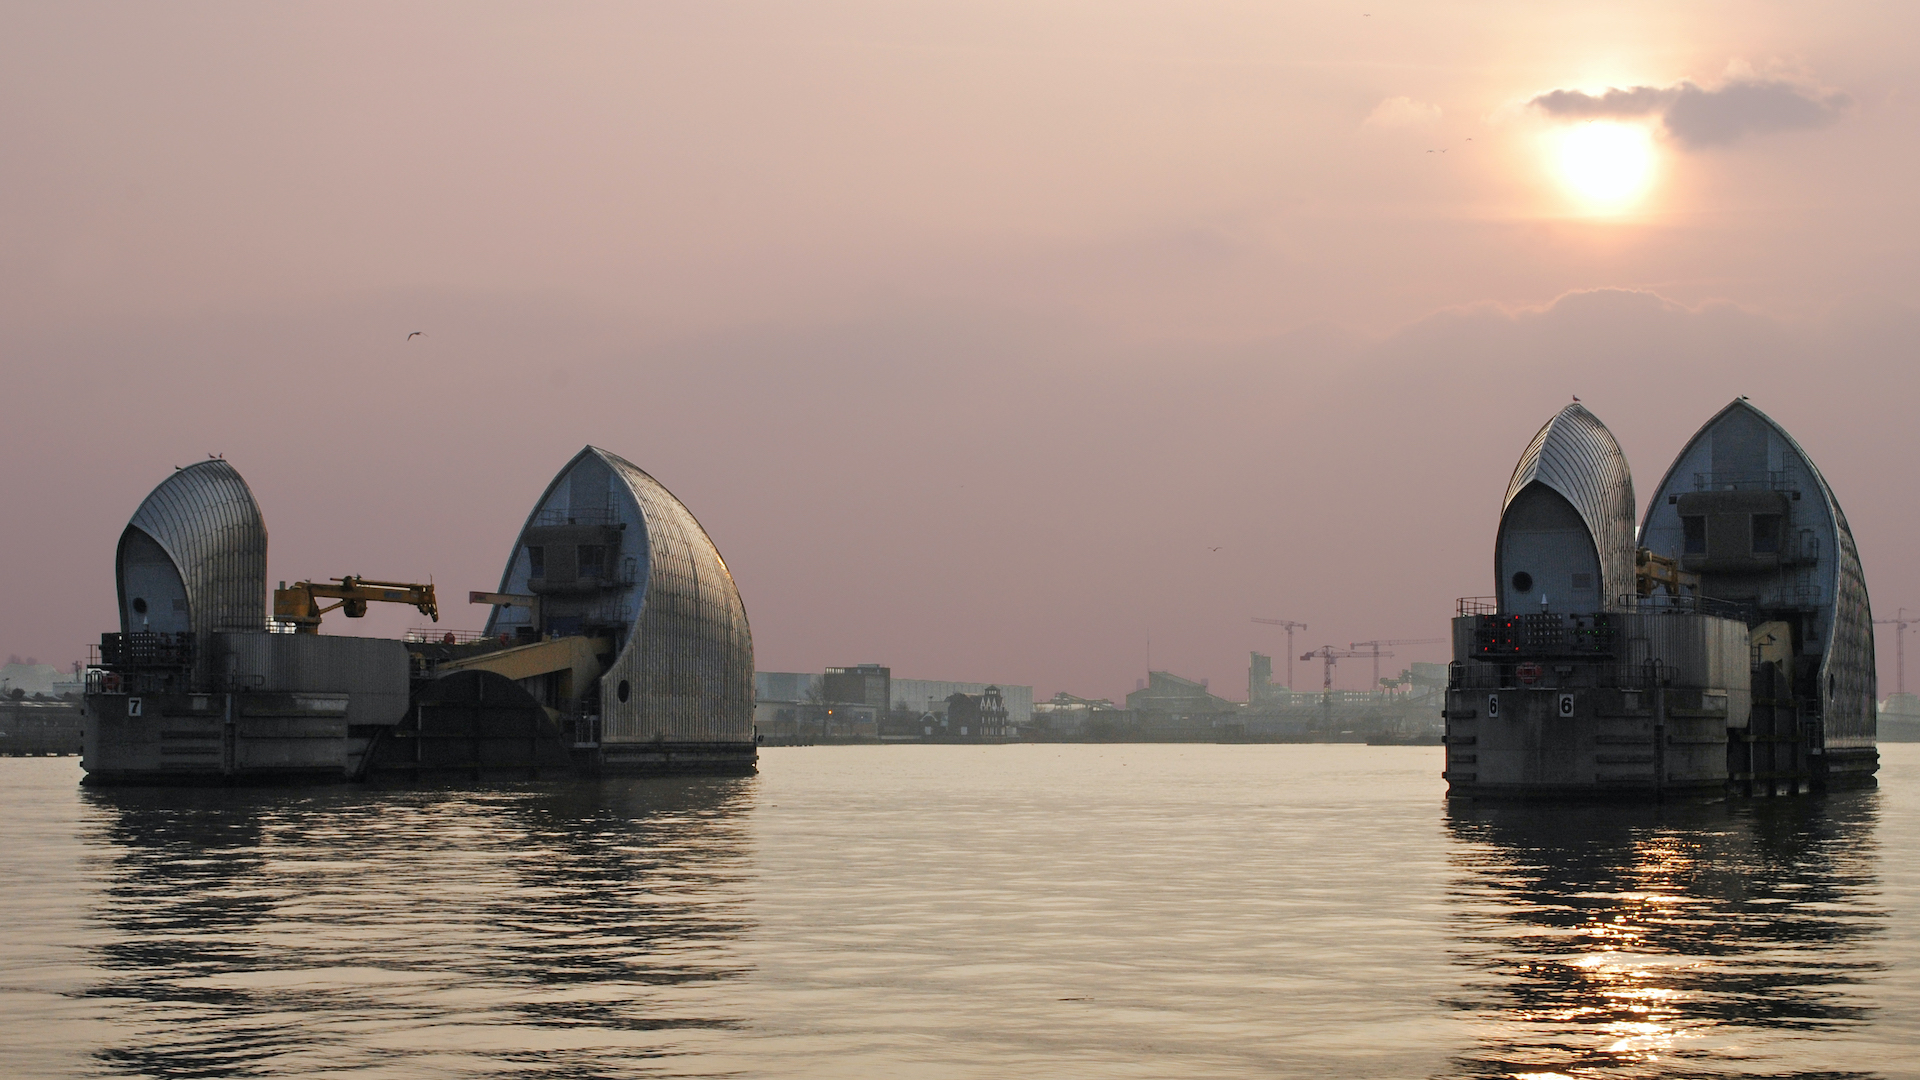 The Thames barrier at sunset